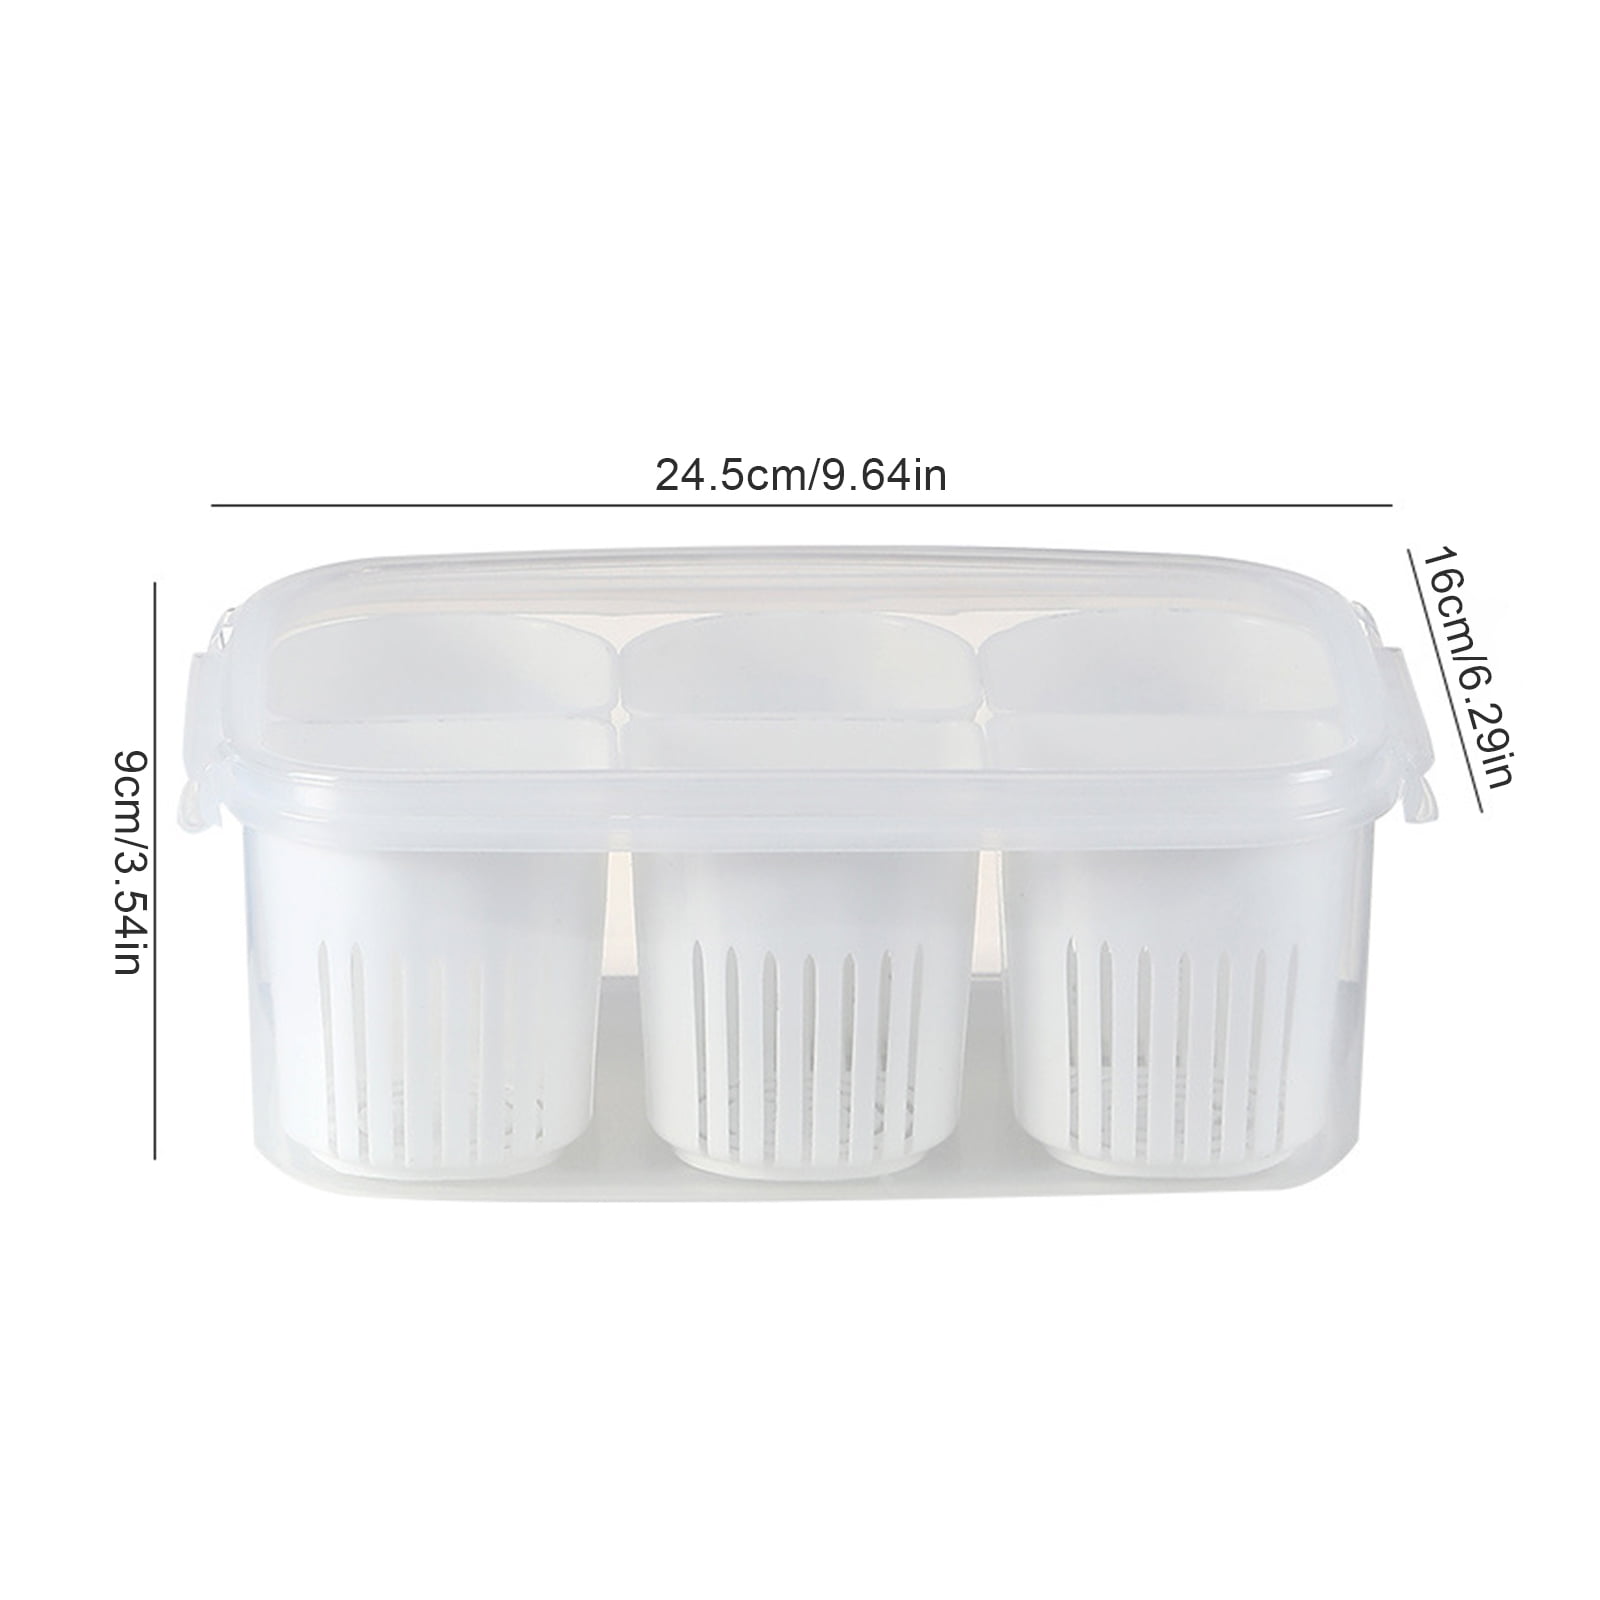 Plastic Food Disposable Containers